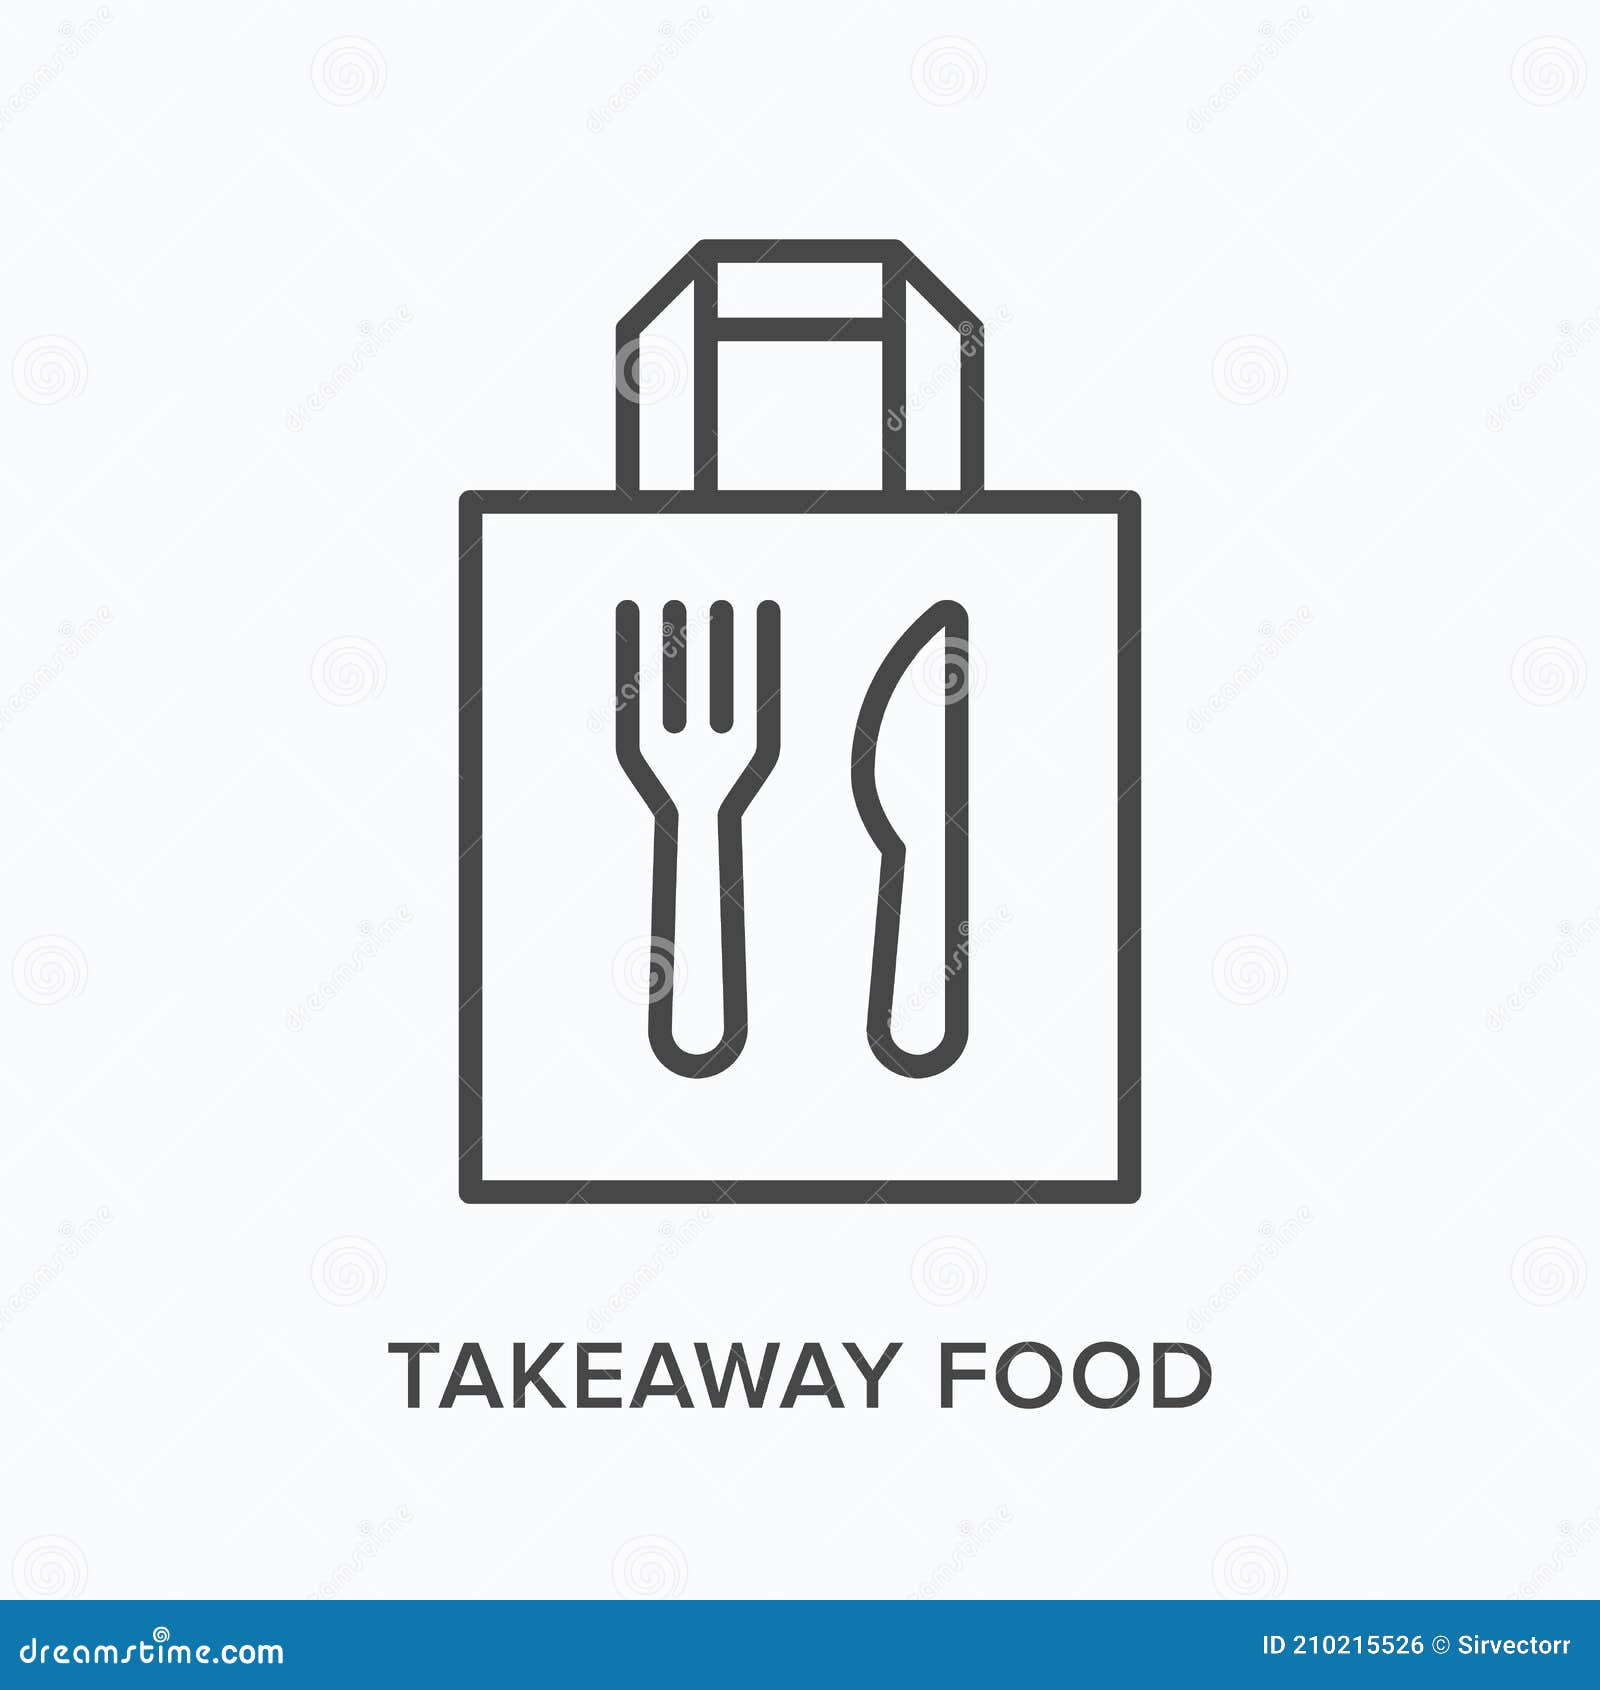 ready food delivery line icon.  outline  of takeaway lunch service. daily meal in papr bag with fork